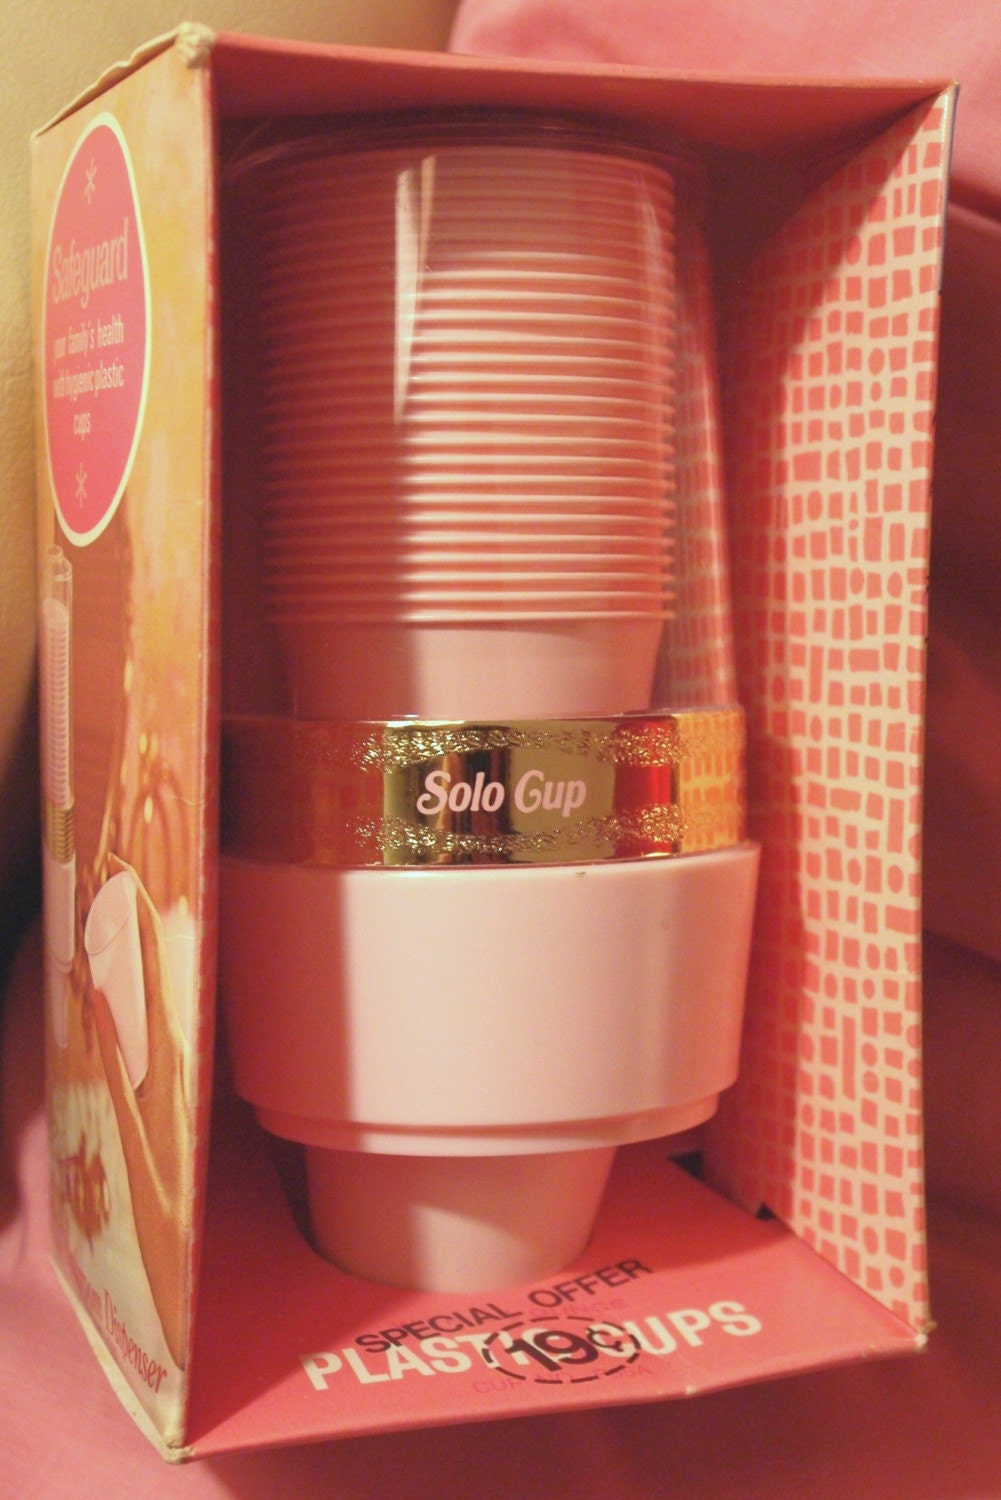 Cup / by Retro  SOLO By PINK Bathroom NOS vintage cup solo Dispenser MODMARGE dispenser